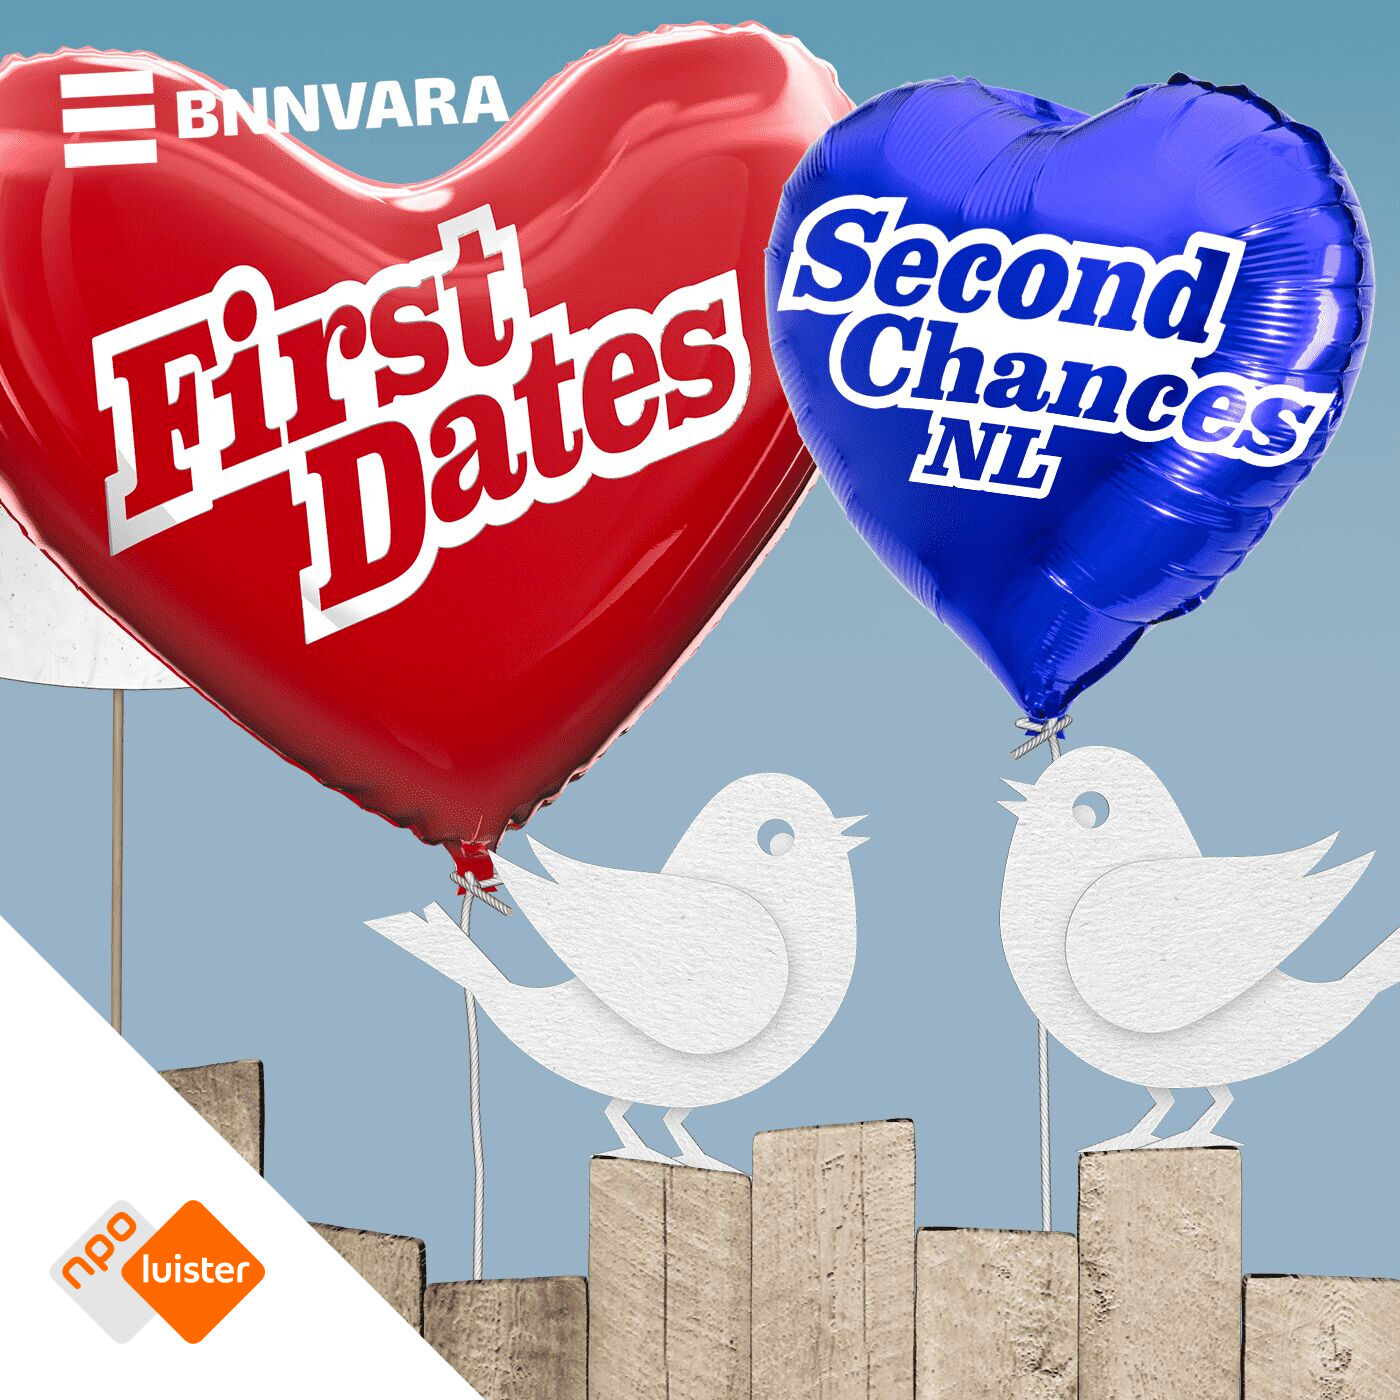 First Dates: Second Chances (NL) podcast show image